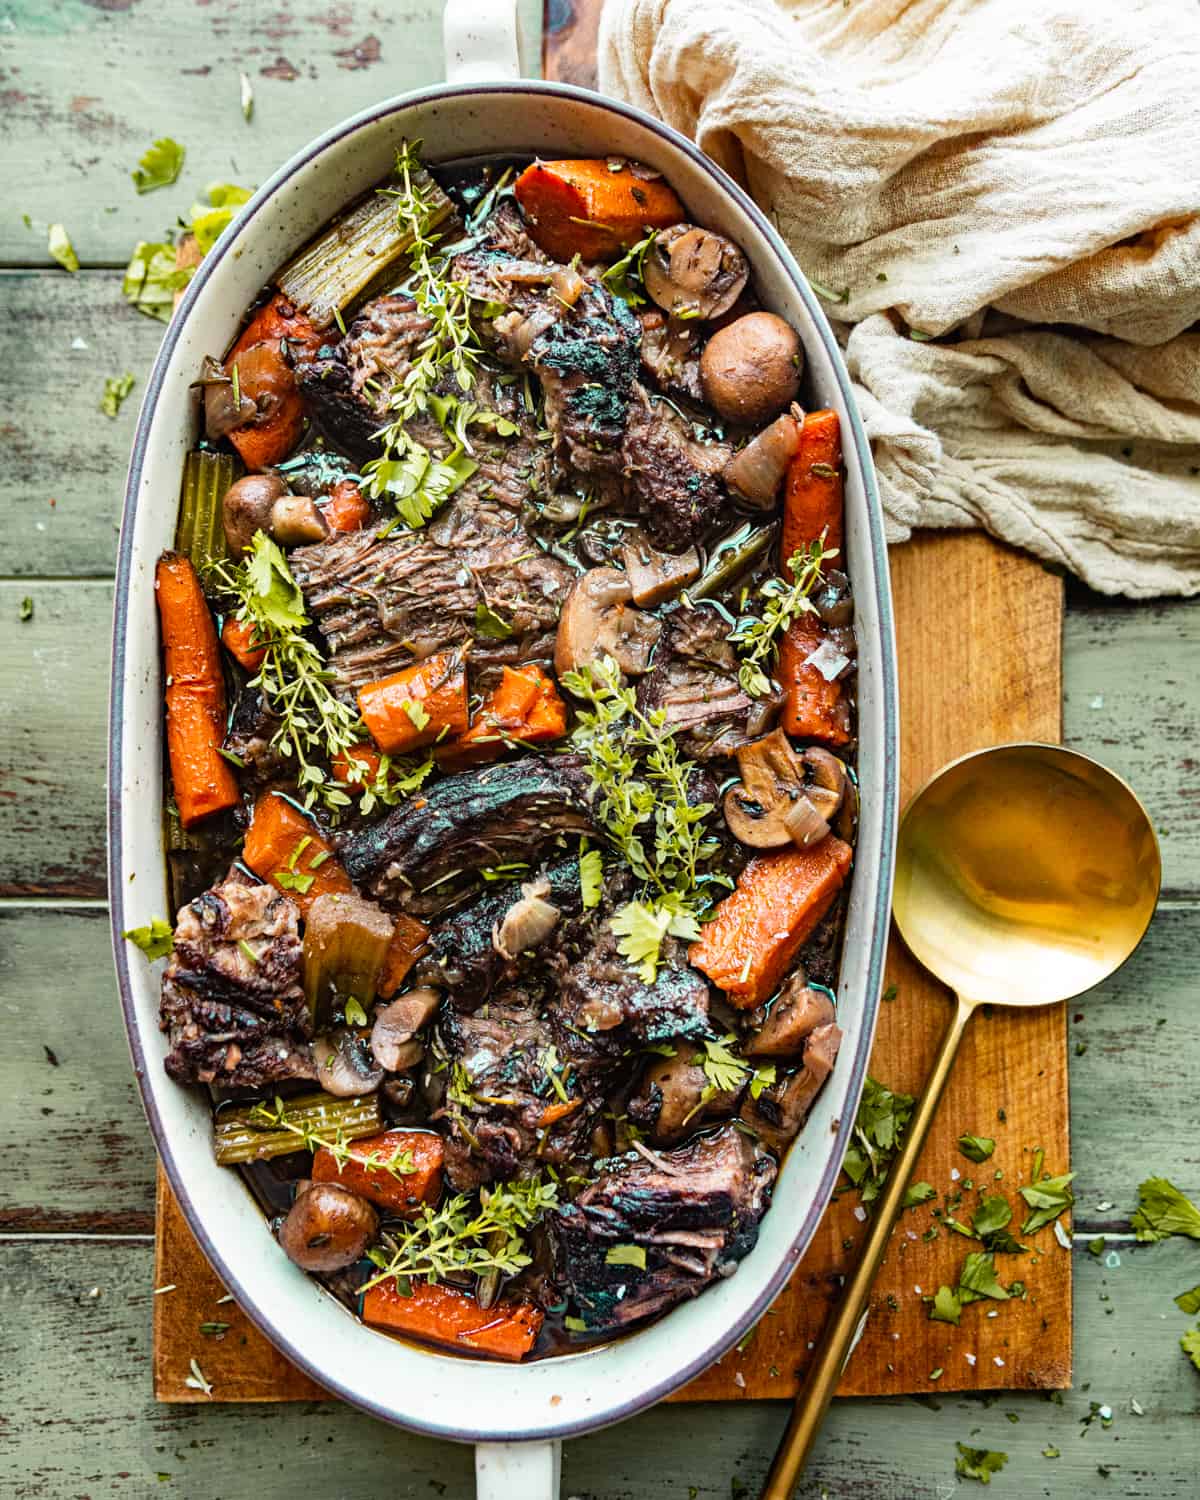 oven baked chuck roast in a serving dish with veggies and fresh herbs.